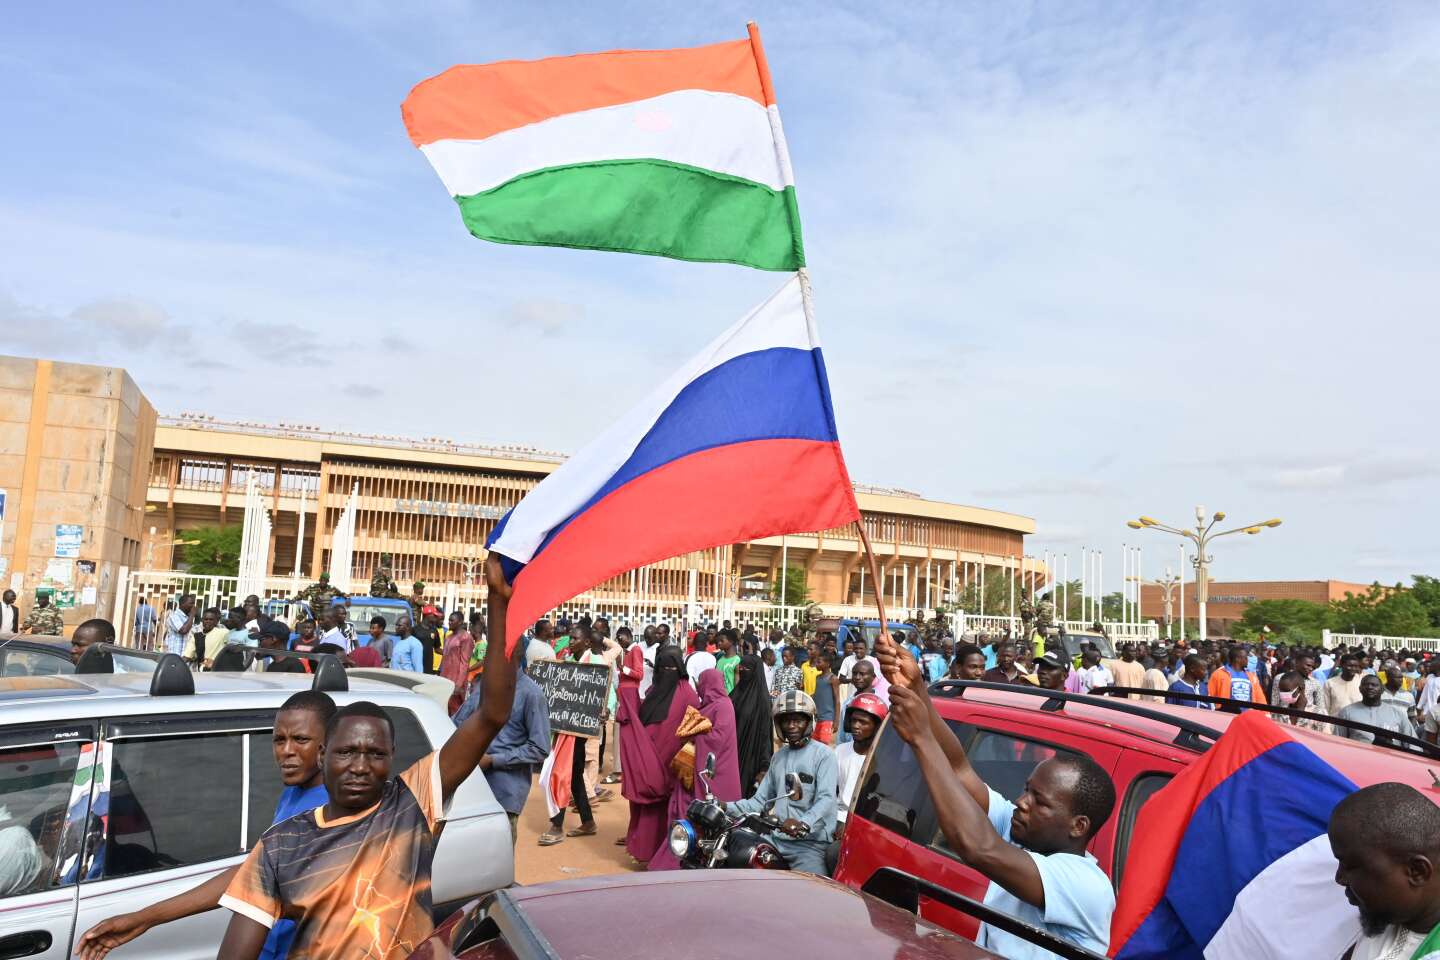 Russian instructors and military equipment arrived in Niamey